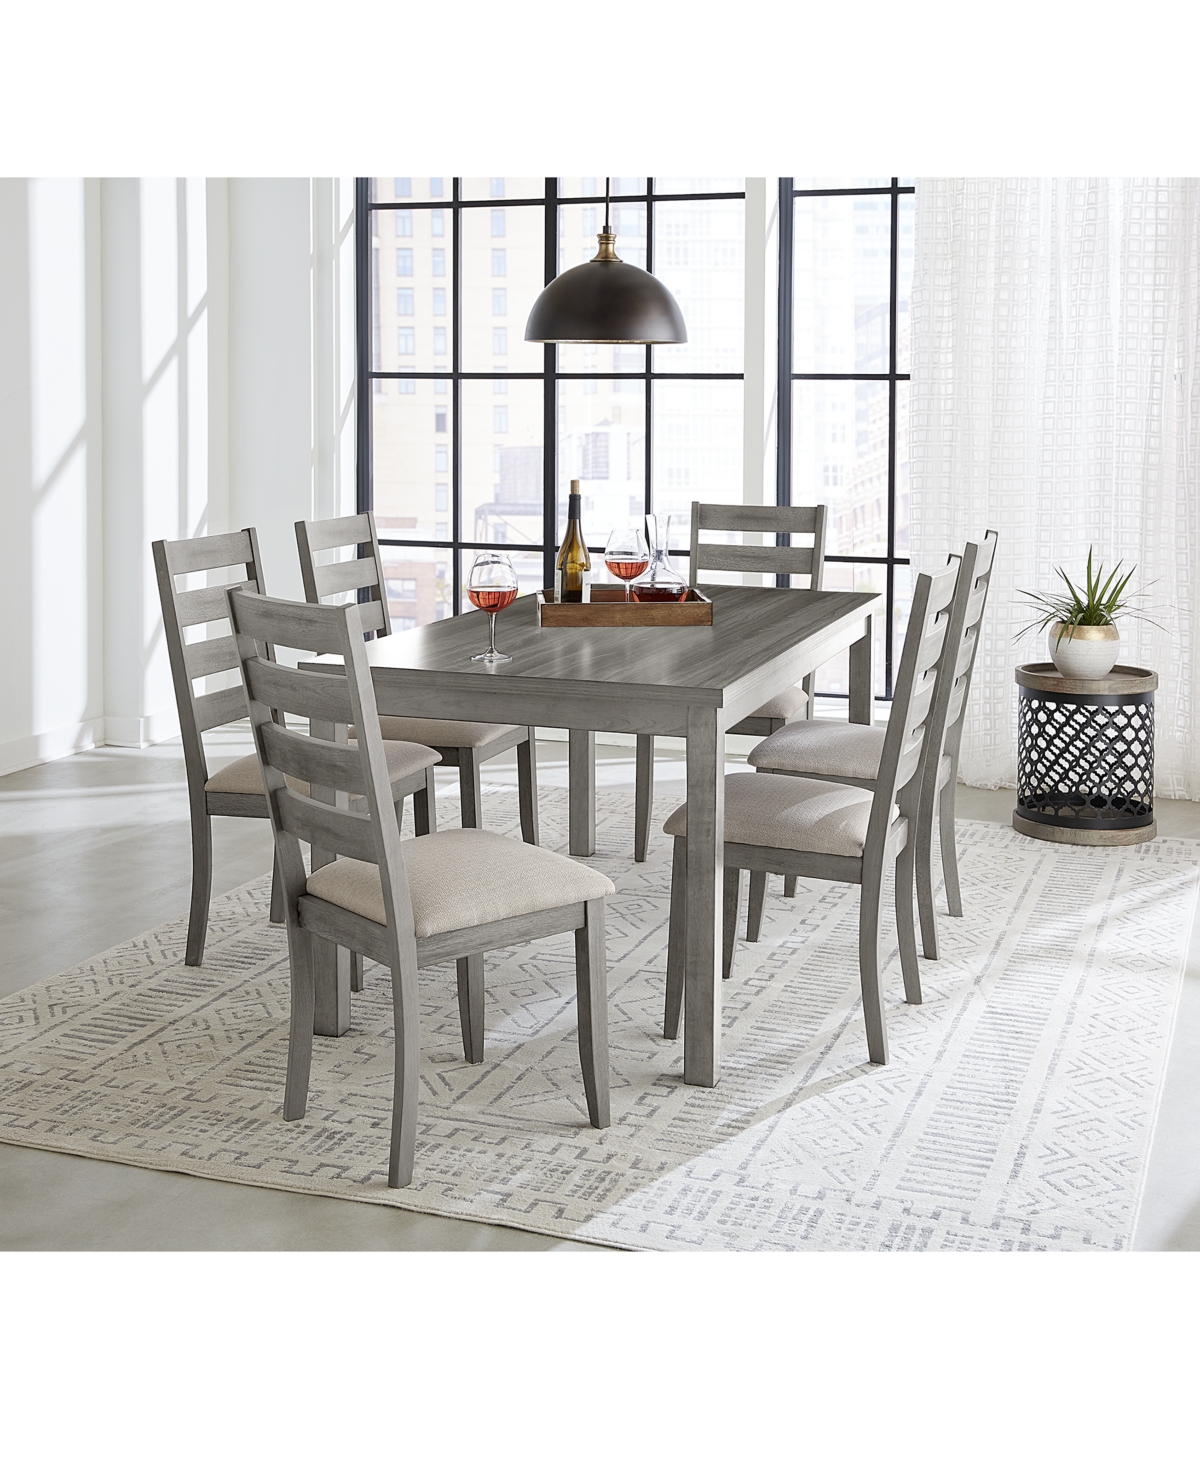 Macy's Closeout! Max Meadows Laminate 7-pc Dining Set (rectangular Trestle Table + 6 Side Chairs) In Grey